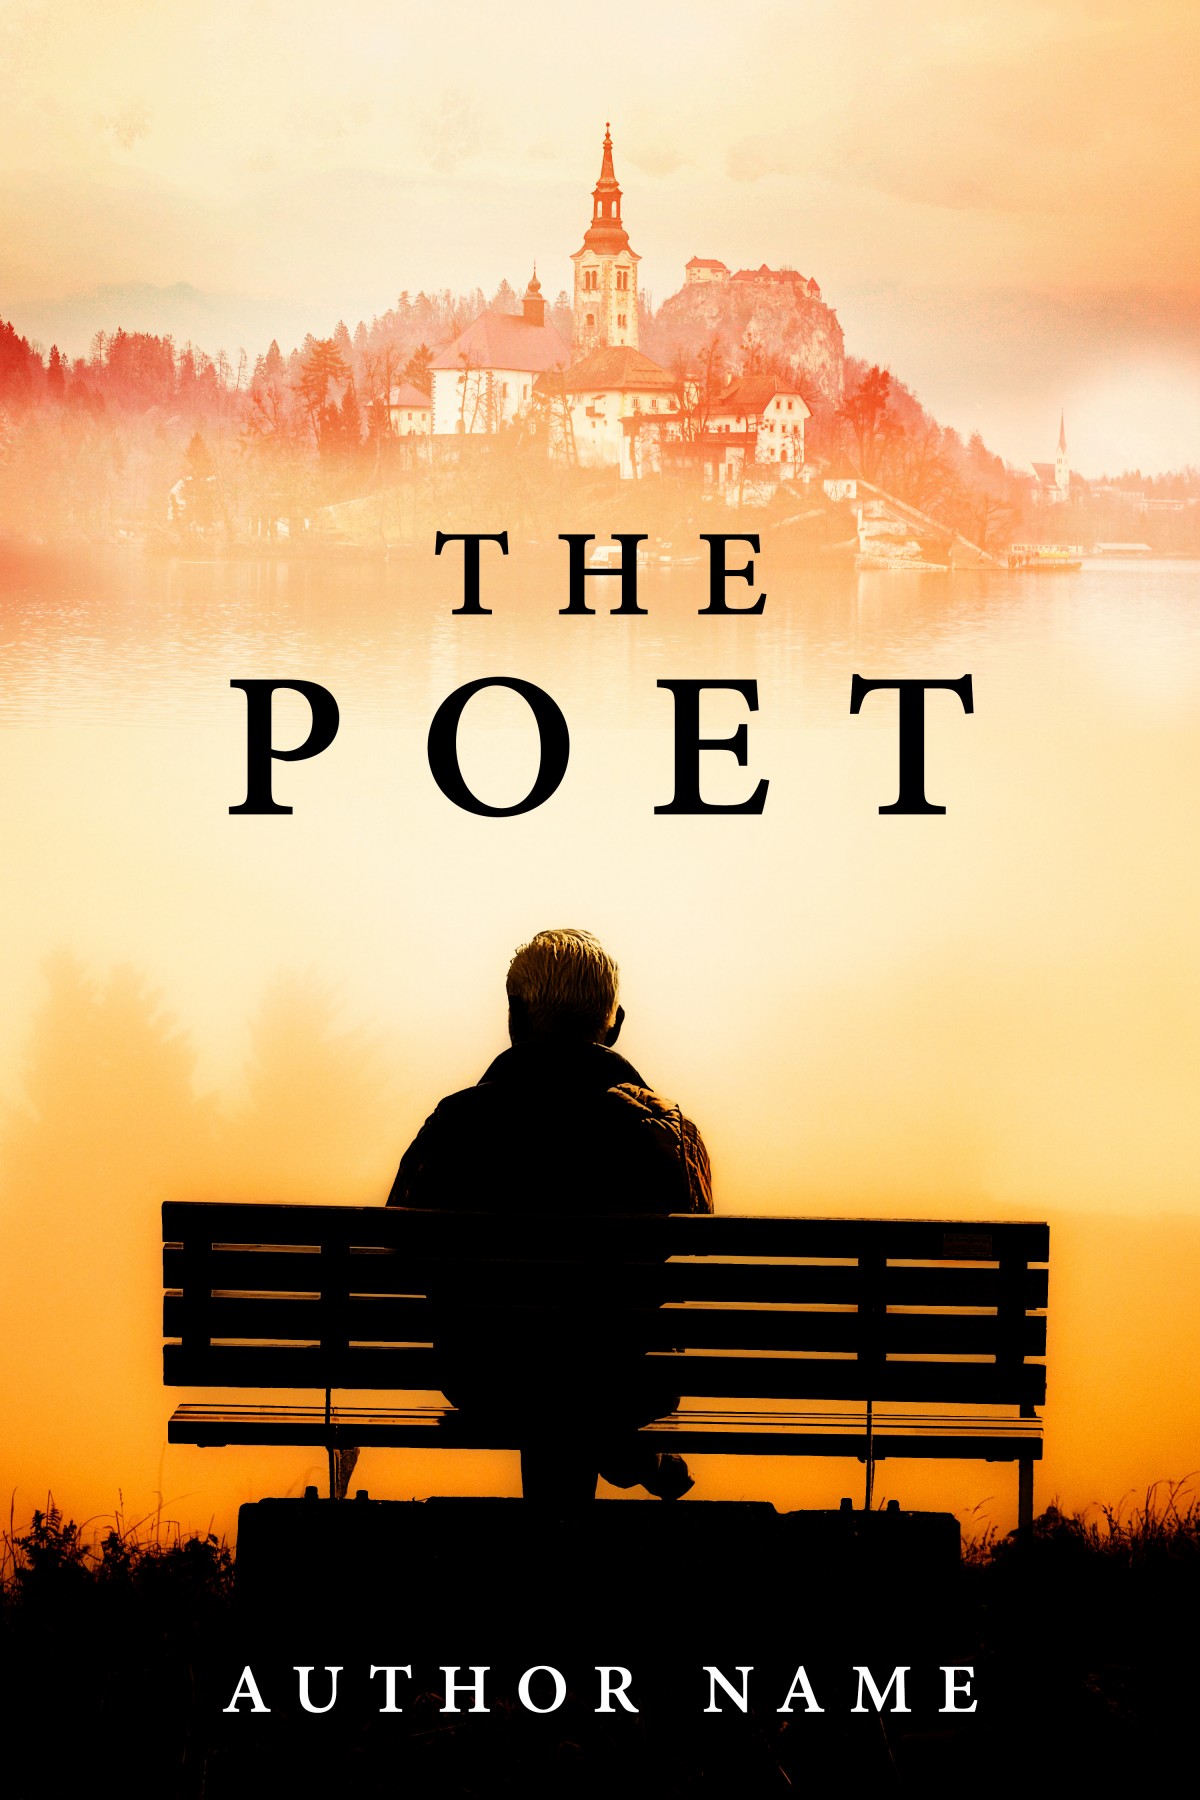 The Poet - The Book Cover Designer